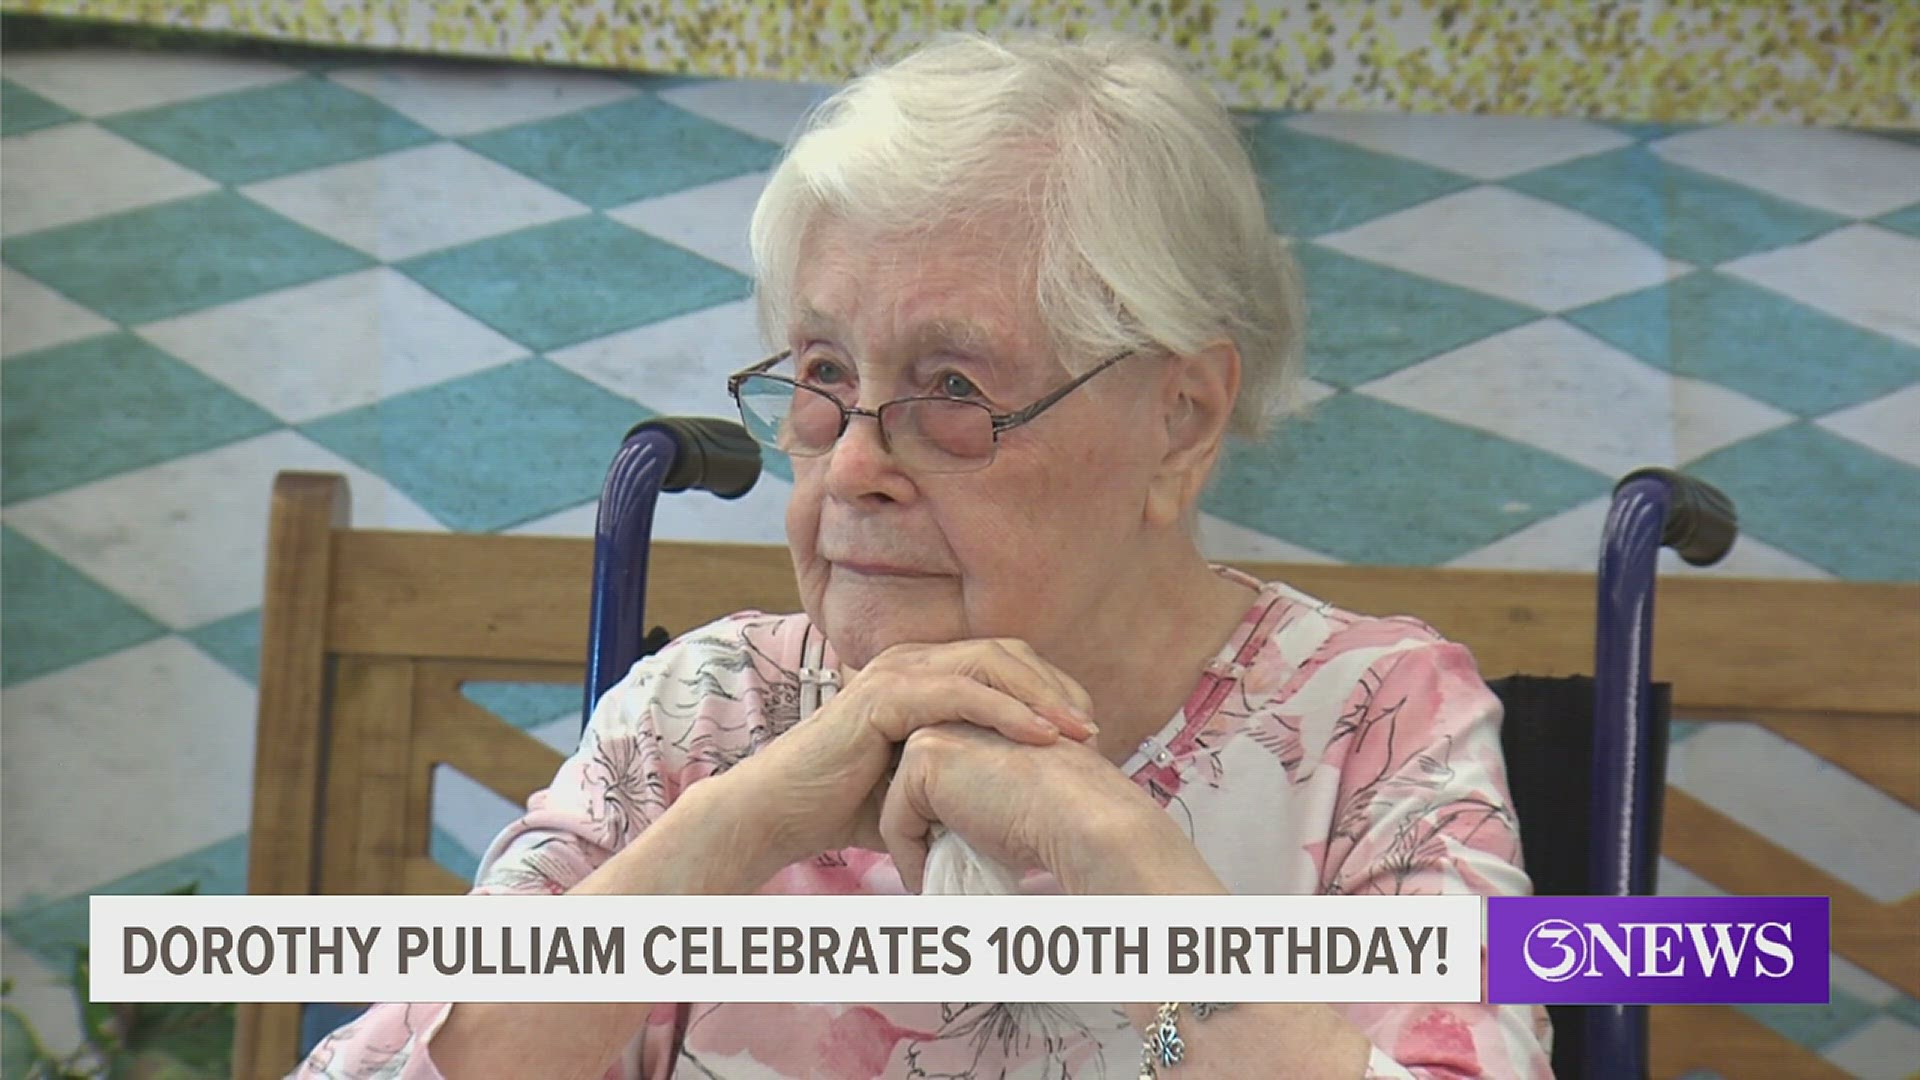 Dorothy Pulliam celebrated her 100th birthday today with family and friends.